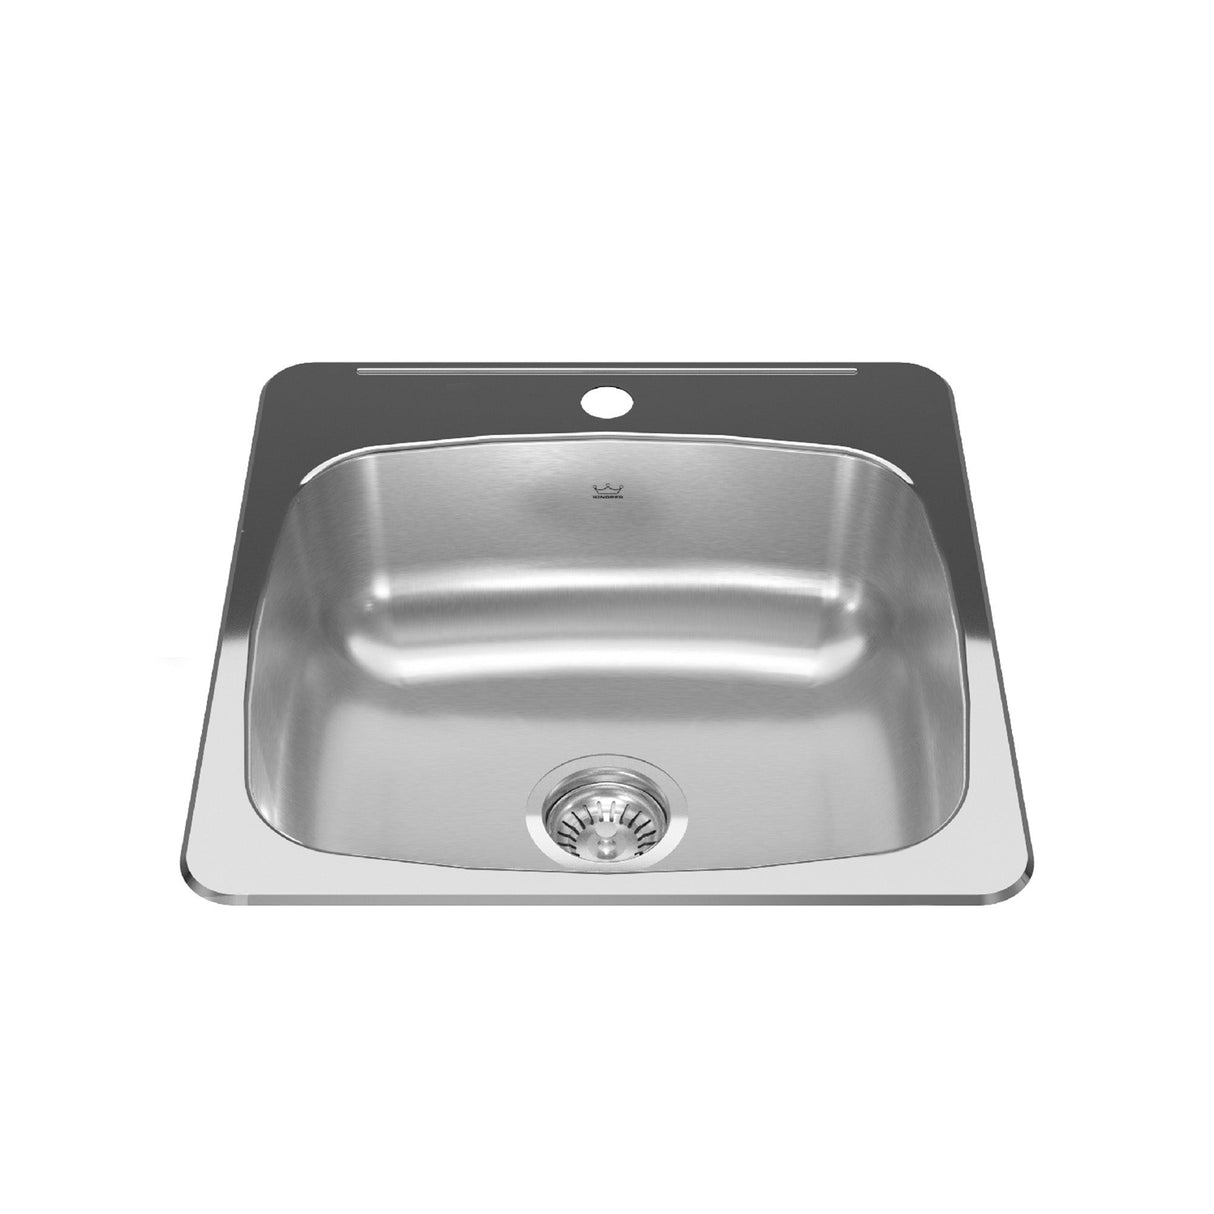 KINDRED RSL2020-1N Reginox 20.13-in LR x 20.56-in FB x 7-in DP Drop In Single Bowl 1-Hole Stainless Steel Kitchen Sink In Linear Brushed Bowl with Mirror Finished Rim